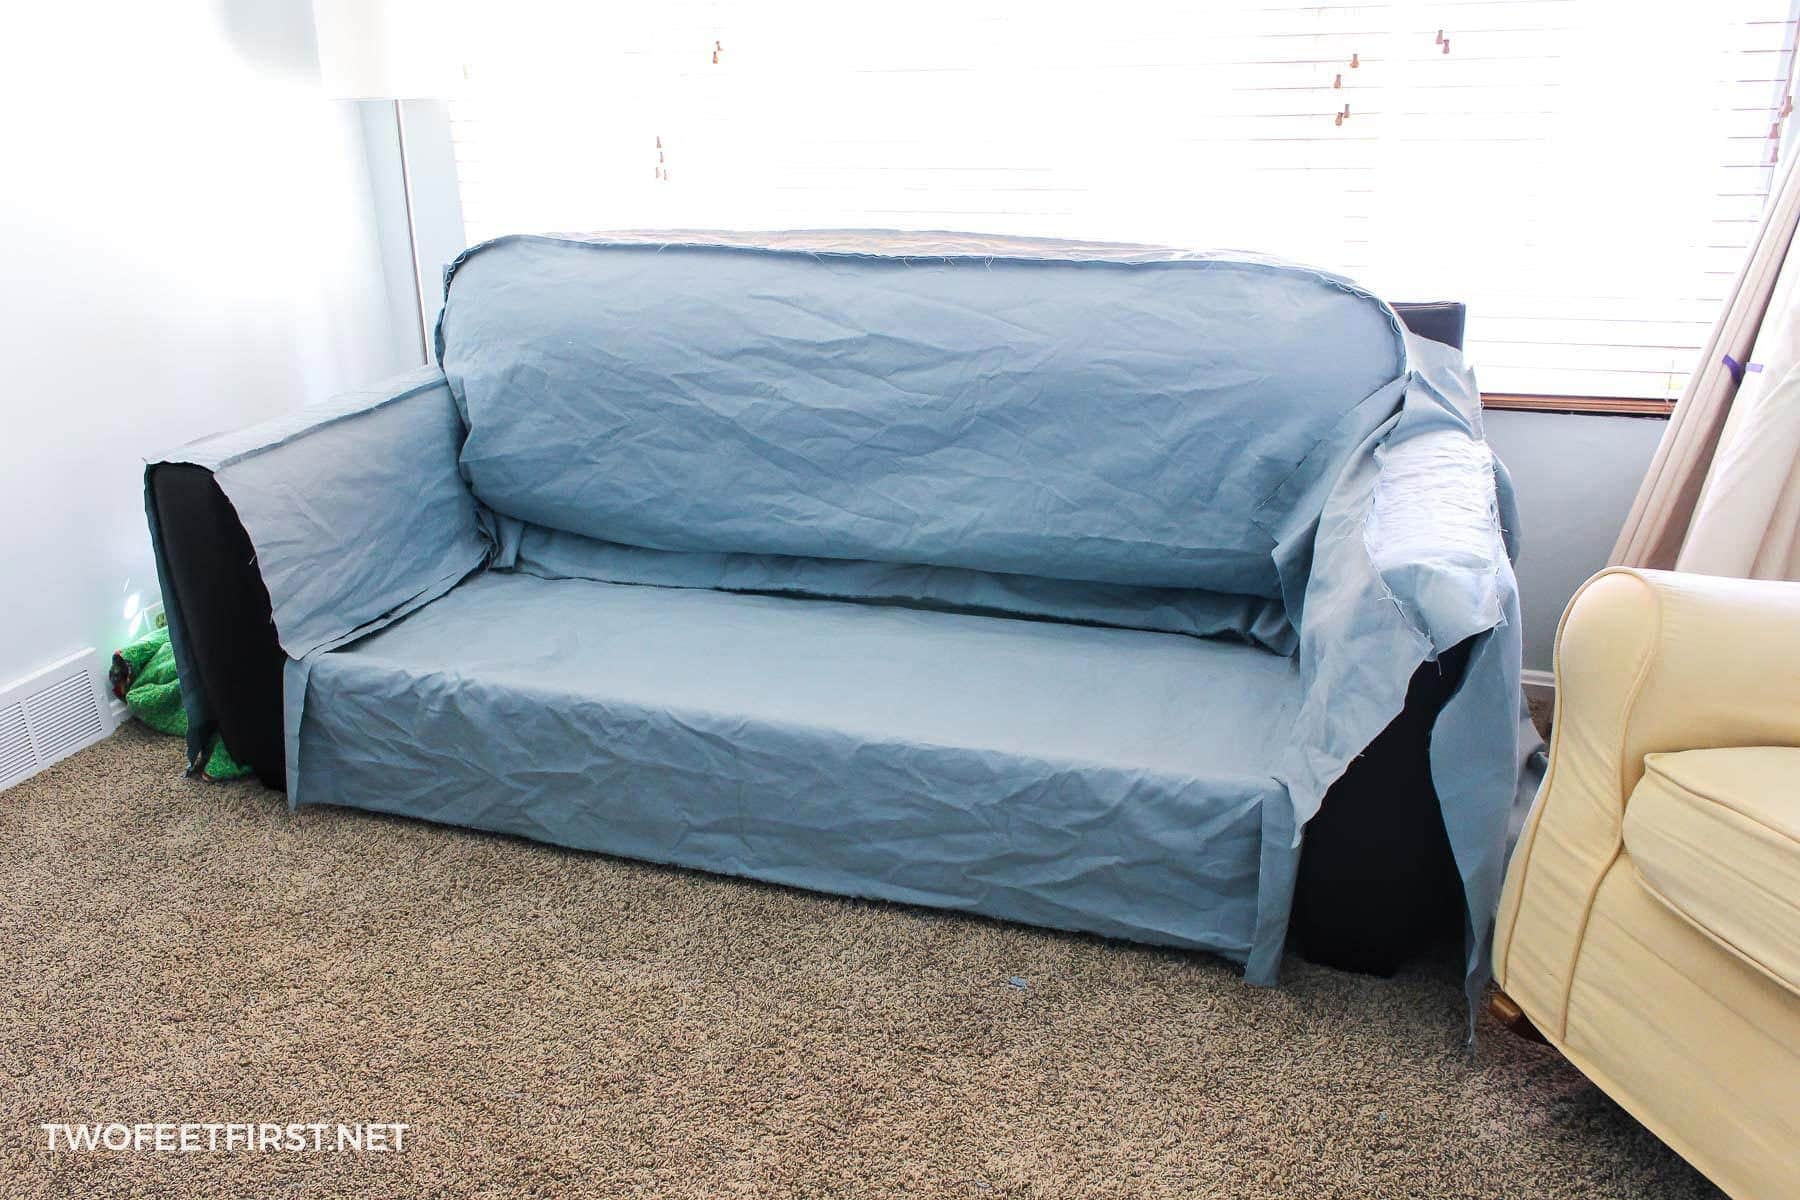 Make Slipcover For A Sofa Diy Couch Cover, Can You Machine Wash Leather Couch Cushion Covers